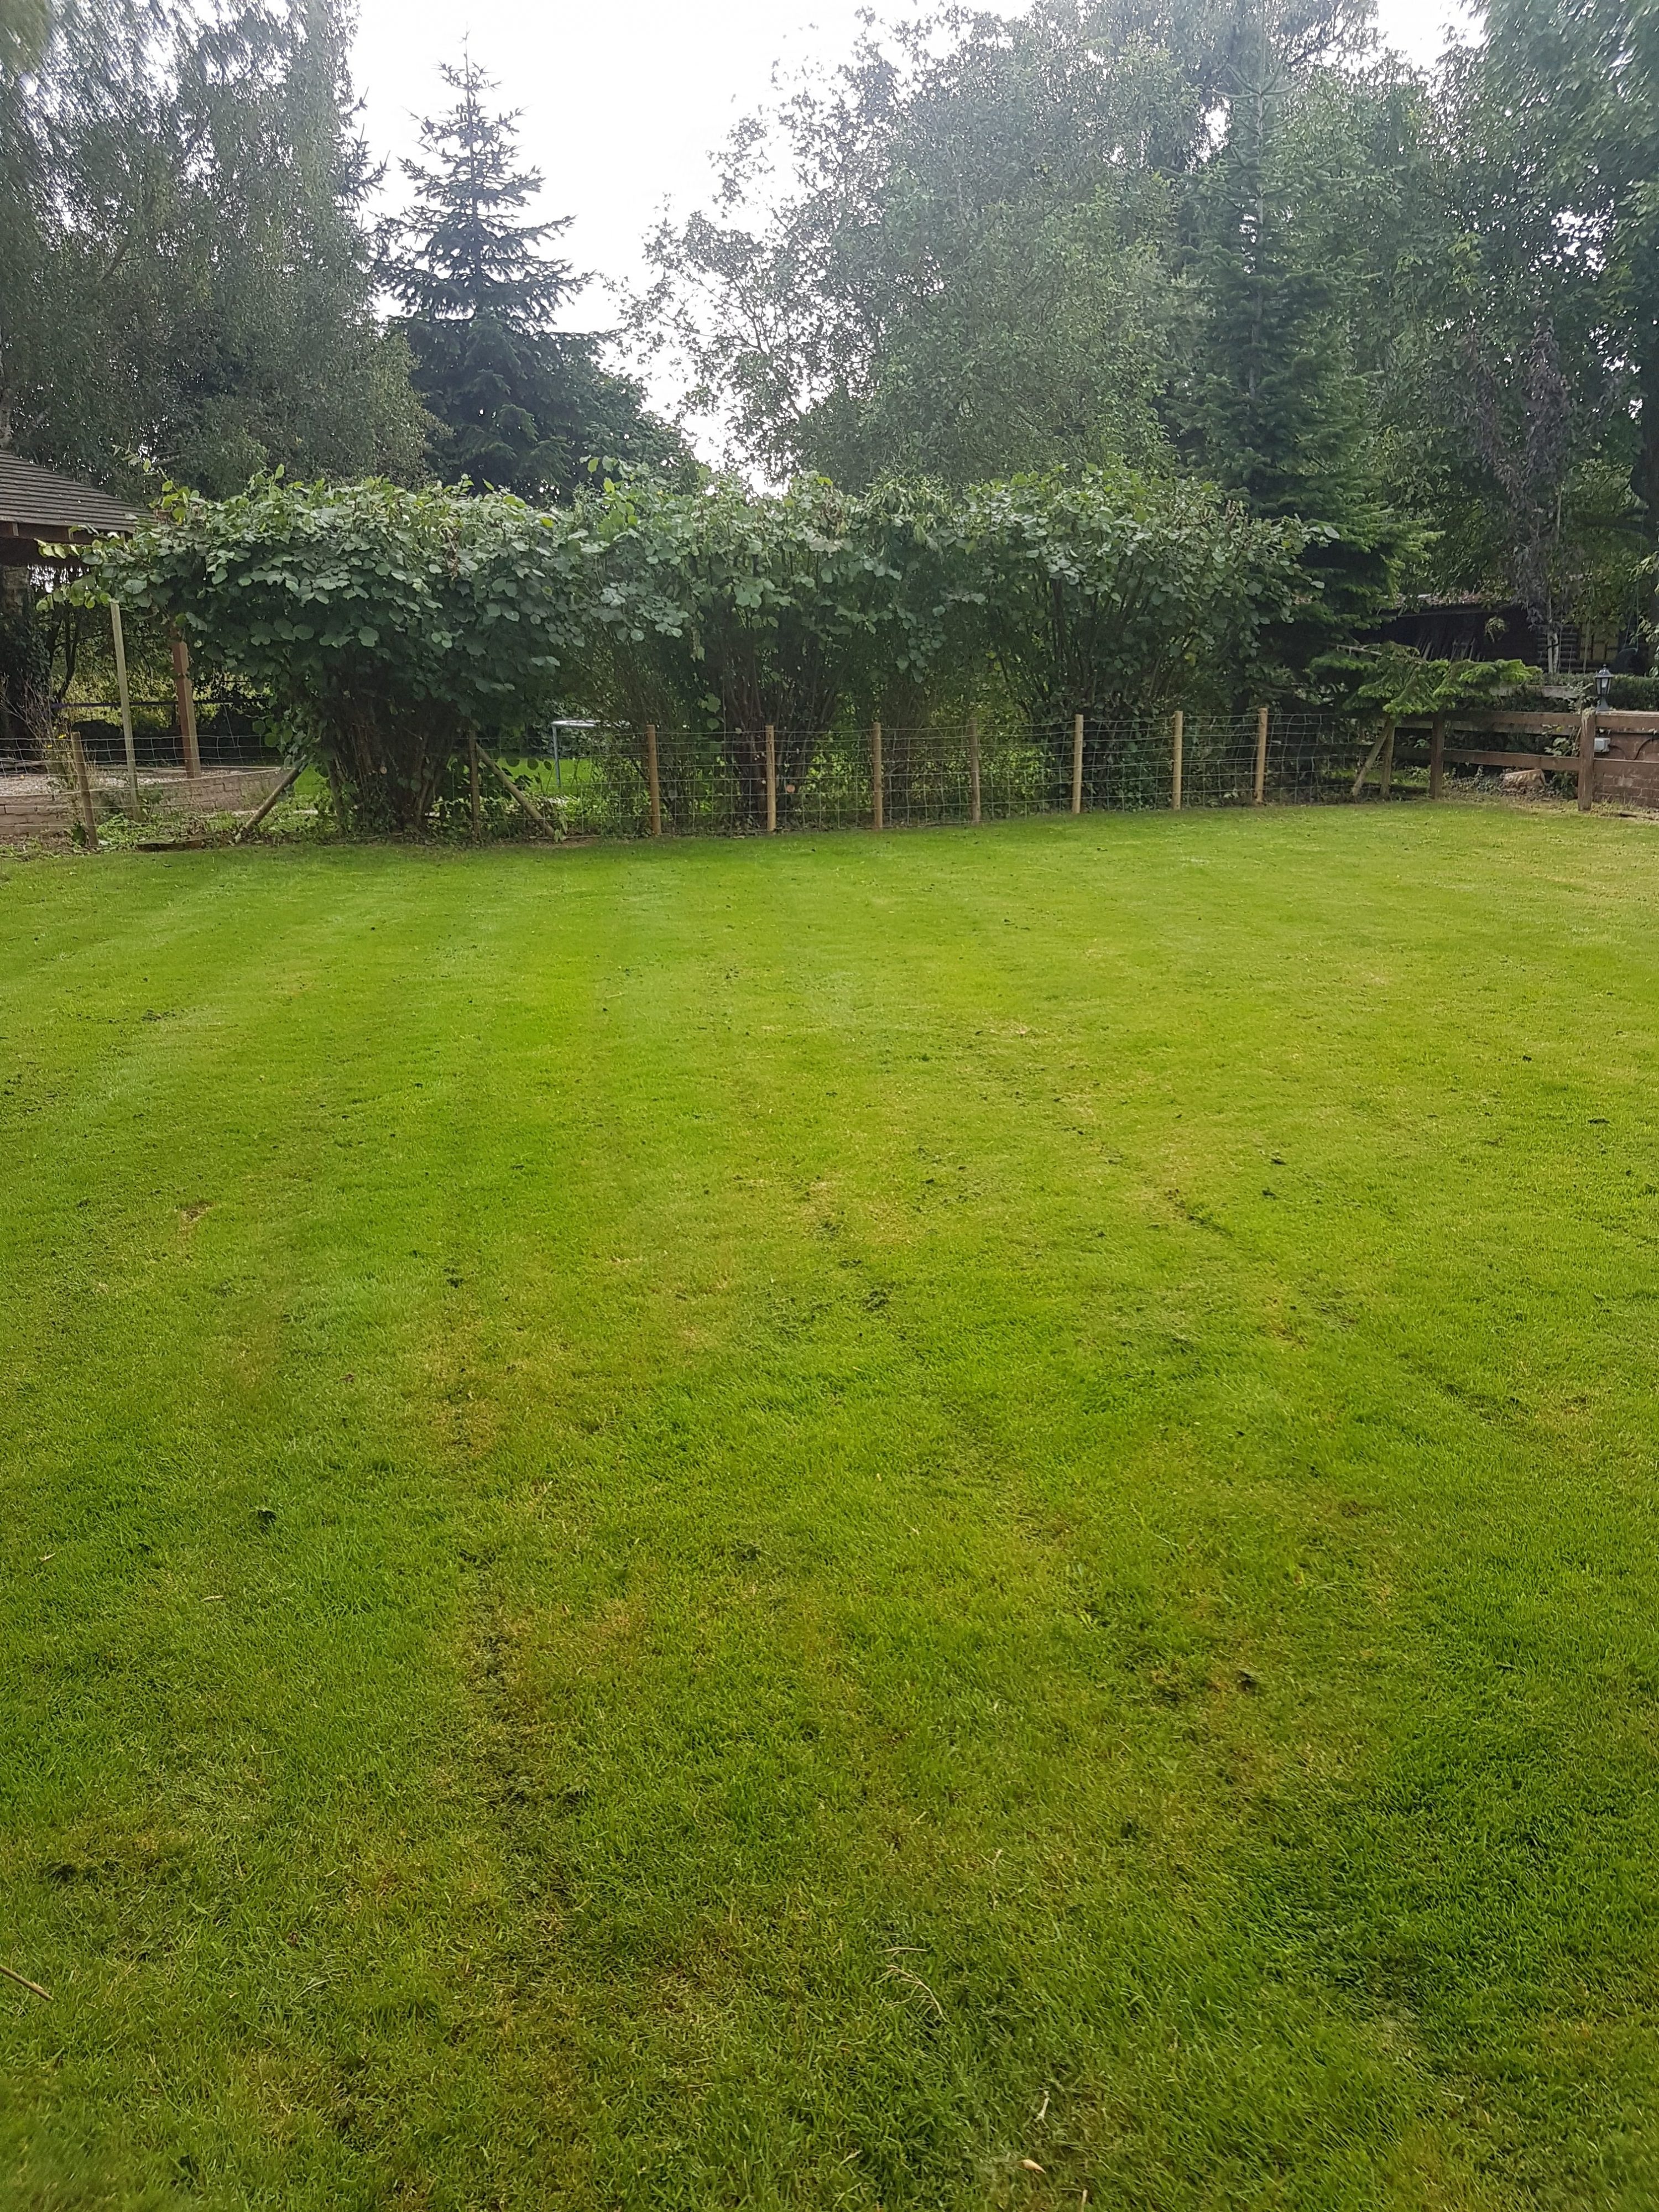 Lawn Mowed and Shrubs Trimmed